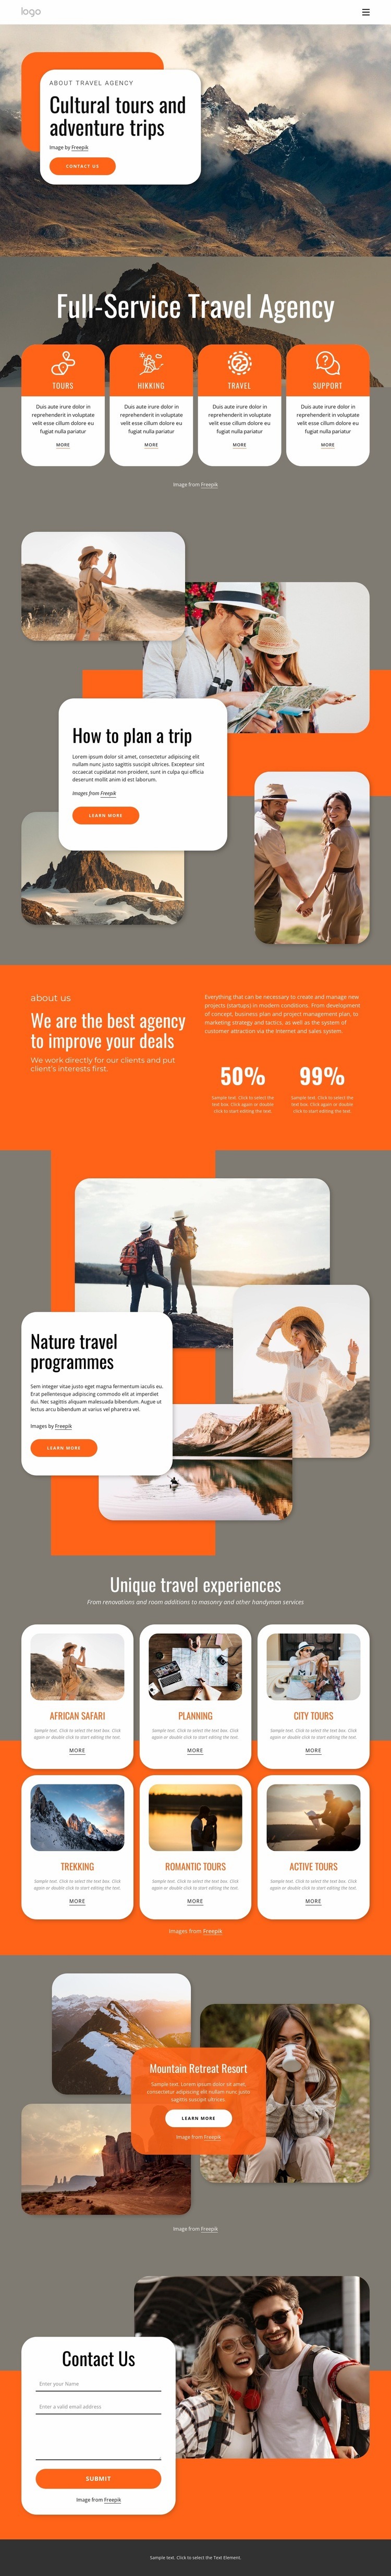 Group travel for all ages Homepage Design